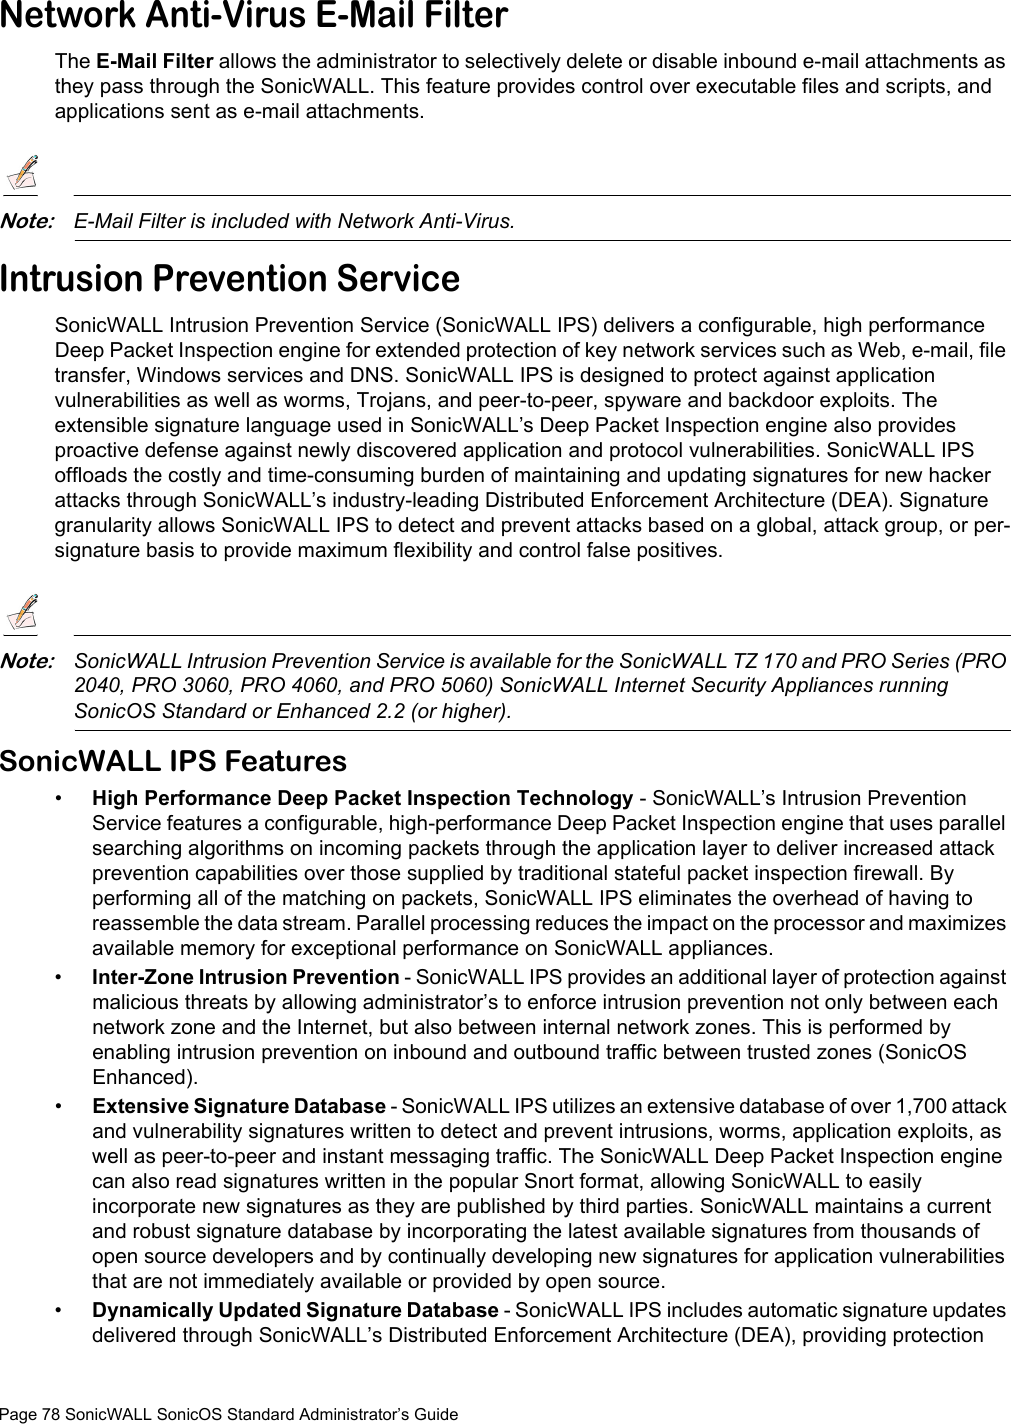 Page 78 SonicWALL SonicOS Standard Administrator’s GuideNetwork Anti-Virus E-Mail FilterThe E-Mail Filter allows the administrator to selectively delete or disable inbound e-mail attachments as they pass through the SonicWALL. This feature provides control over executable files and scripts, and applications sent as e-mail attachments.Note:E-Mail Filter is included with Network Anti-Virus.Intrusion Prevention ServiceSonicWALL Intrusion Prevention Service (SonicWALL IPS) delivers a configurable, high performance Deep Packet Inspection engine for extended protection of key network services such as Web, e-mail, file transfer, Windows services and DNS. SonicWALL IPS is designed to protect against application vulnerabilities as well as worms, Trojans, and peer-to-peer, spyware and backdoor exploits. The extensible signature language used in SonicWALL’s Deep Packet Inspection engine also provides proactive defense against newly discovered application and protocol vulnerabilities. SonicWALL IPS offloads the costly and time-consuming burden of maintaining and updating signatures for new hacker attacks through SonicWALL’s industry-leading Distributed Enforcement Architecture (DEA). Signature granularity allows SonicWALL IPS to detect and prevent attacks based on a global, attack group, or per-signature basis to provide maximum flexibility and control false positives.Note:SonicWALL Intrusion Prevention Service is available for the SonicWALL TZ 170 and PRO Series (PRO 2040, PRO 3060, PRO 4060, and PRO 5060) SonicWALL Internet Security Appliances running SonicOS Standard or Enhanced 2.2 (or higher).SonicWALL IPS Features•High Performance Deep Packet Inspection Technology - SonicWALL’s Intrusion Prevention Service features a configurable, high-performance Deep Packet Inspection engine that uses parallel searching algorithms on incoming packets through the application layer to deliver increased attack prevention capabilities over those supplied by traditional stateful packet inspection firewall. By performing all of the matching on packets, SonicWALL IPS eliminates the overhead of having to reassemble the data stream. Parallel processing reduces the impact on the processor and maximizes available memory for exceptional performance on SonicWALL appliances.•Inter-Zone Intrusion Prevention - SonicWALL IPS provides an additional layer of protection against malicious threats by allowing administrator’s to enforce intrusion prevention not only between each network zone and the Internet, but also between internal network zones. This is performed by enabling intrusion prevention on inbound and outbound traffic between trusted zones (SonicOS Enhanced).•Extensive Signature Database - SonicWALL IPS utilizes an extensive database of over 1,700 attack and vulnerability signatures written to detect and prevent intrusions, worms, application exploits, as well as peer-to-peer and instant messaging traffic. The SonicWALL Deep Packet Inspection engine can also read signatures written in the popular Snort format, allowing SonicWALL to easily incorporate new signatures as they are published by third parties. SonicWALL maintains a current and robust signature database by incorporating the latest available signatures from thousands of open source developers and by continually developing new signatures for application vulnerabilities that are not immediately available or provided by open source. •Dynamically Updated Signature Database - SonicWALL IPS includes automatic signature updates delivered through SonicWALL’s Distributed Enforcement Architecture (DEA), providing protection 